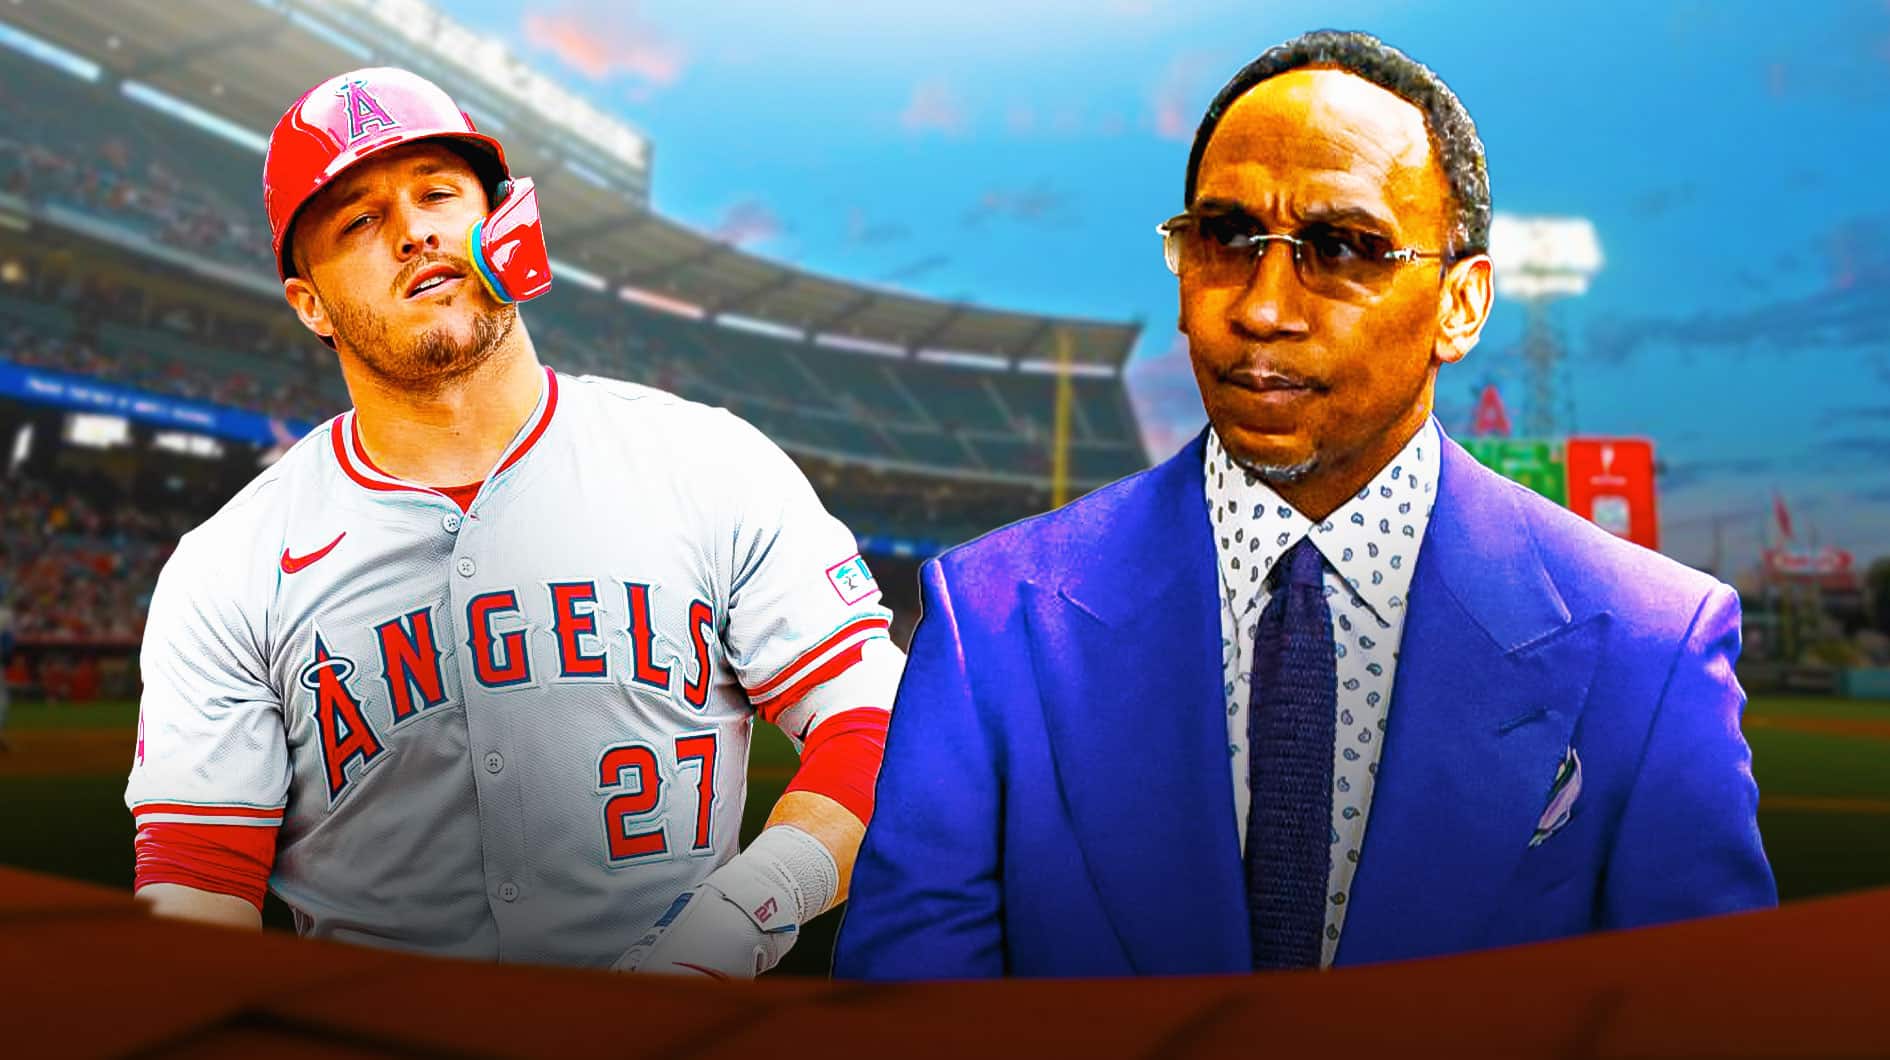 Stephen A. Smith calls Angels star Mike Trout's injury 'karma' in shocking rant